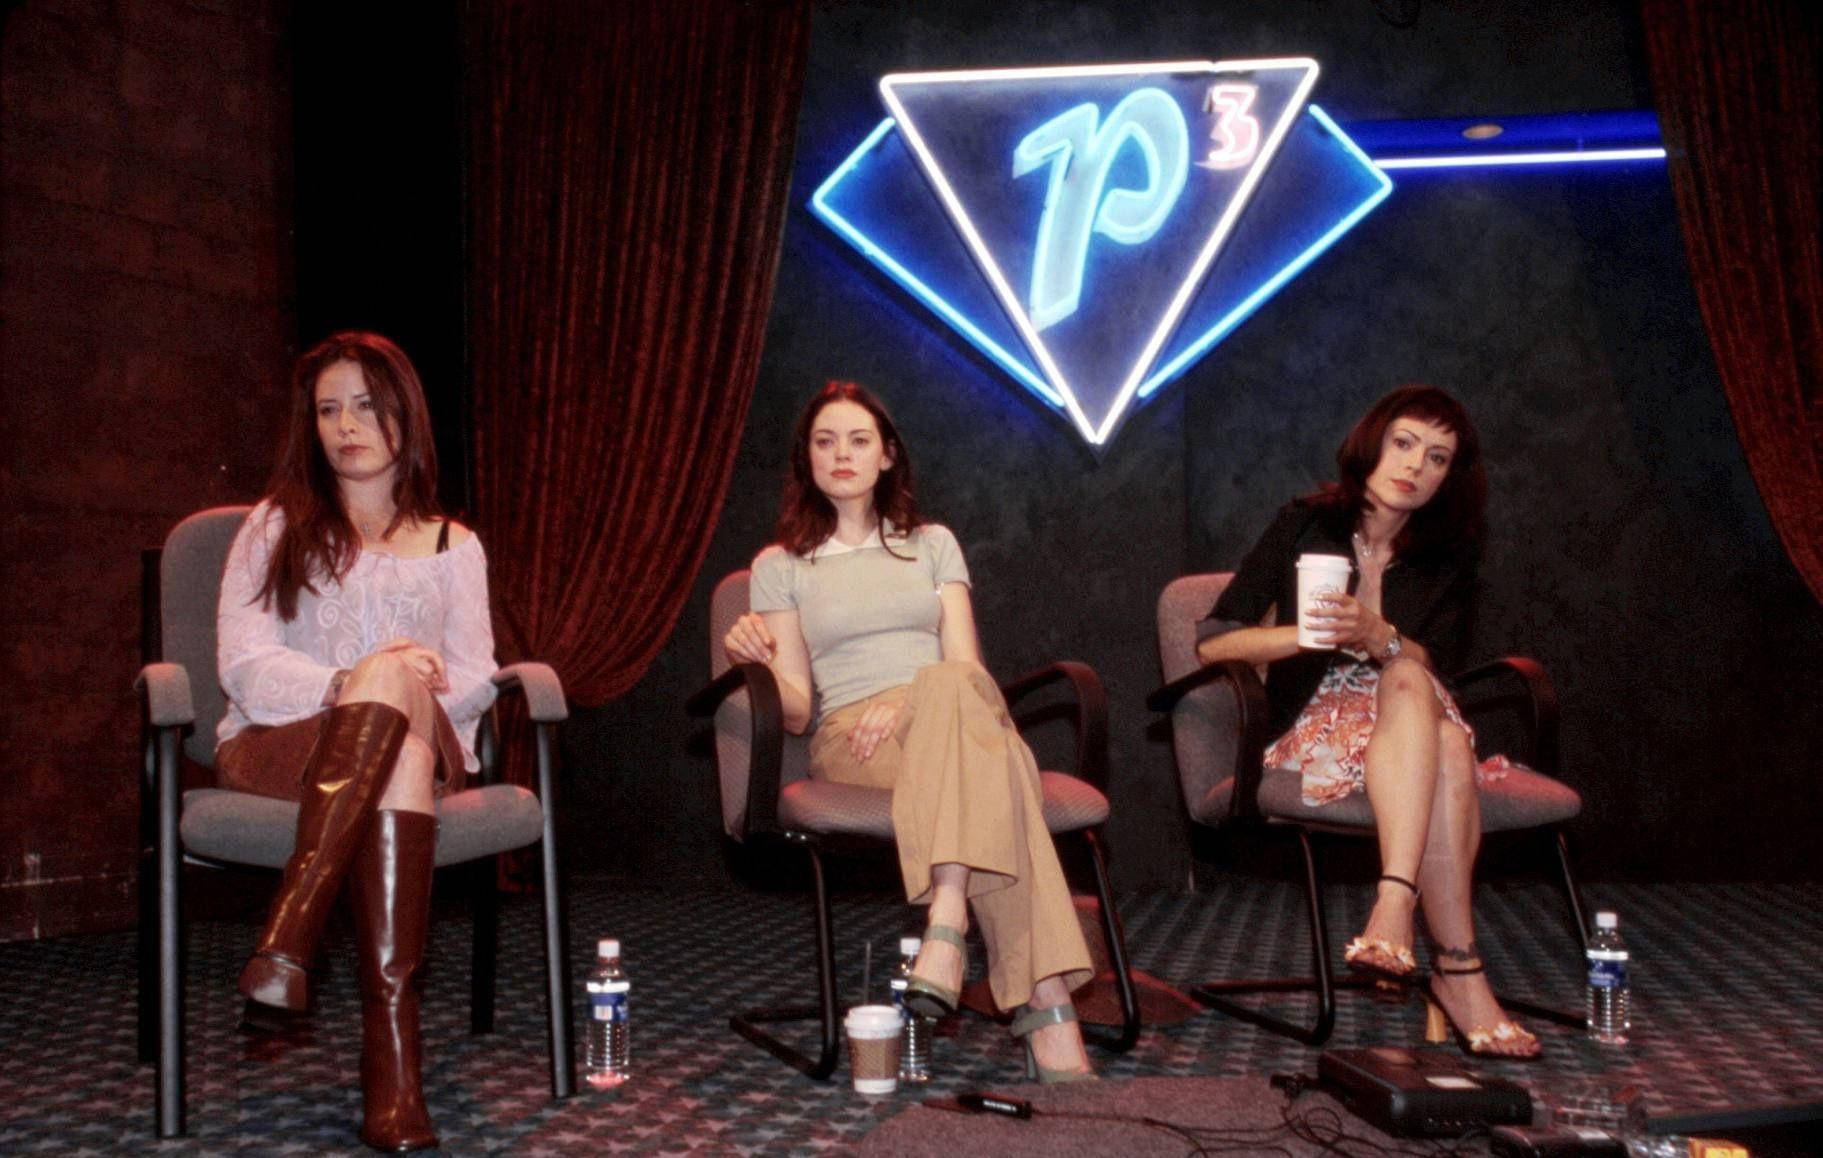 Charmed Tv Show - Main Characters During Press Conference Background